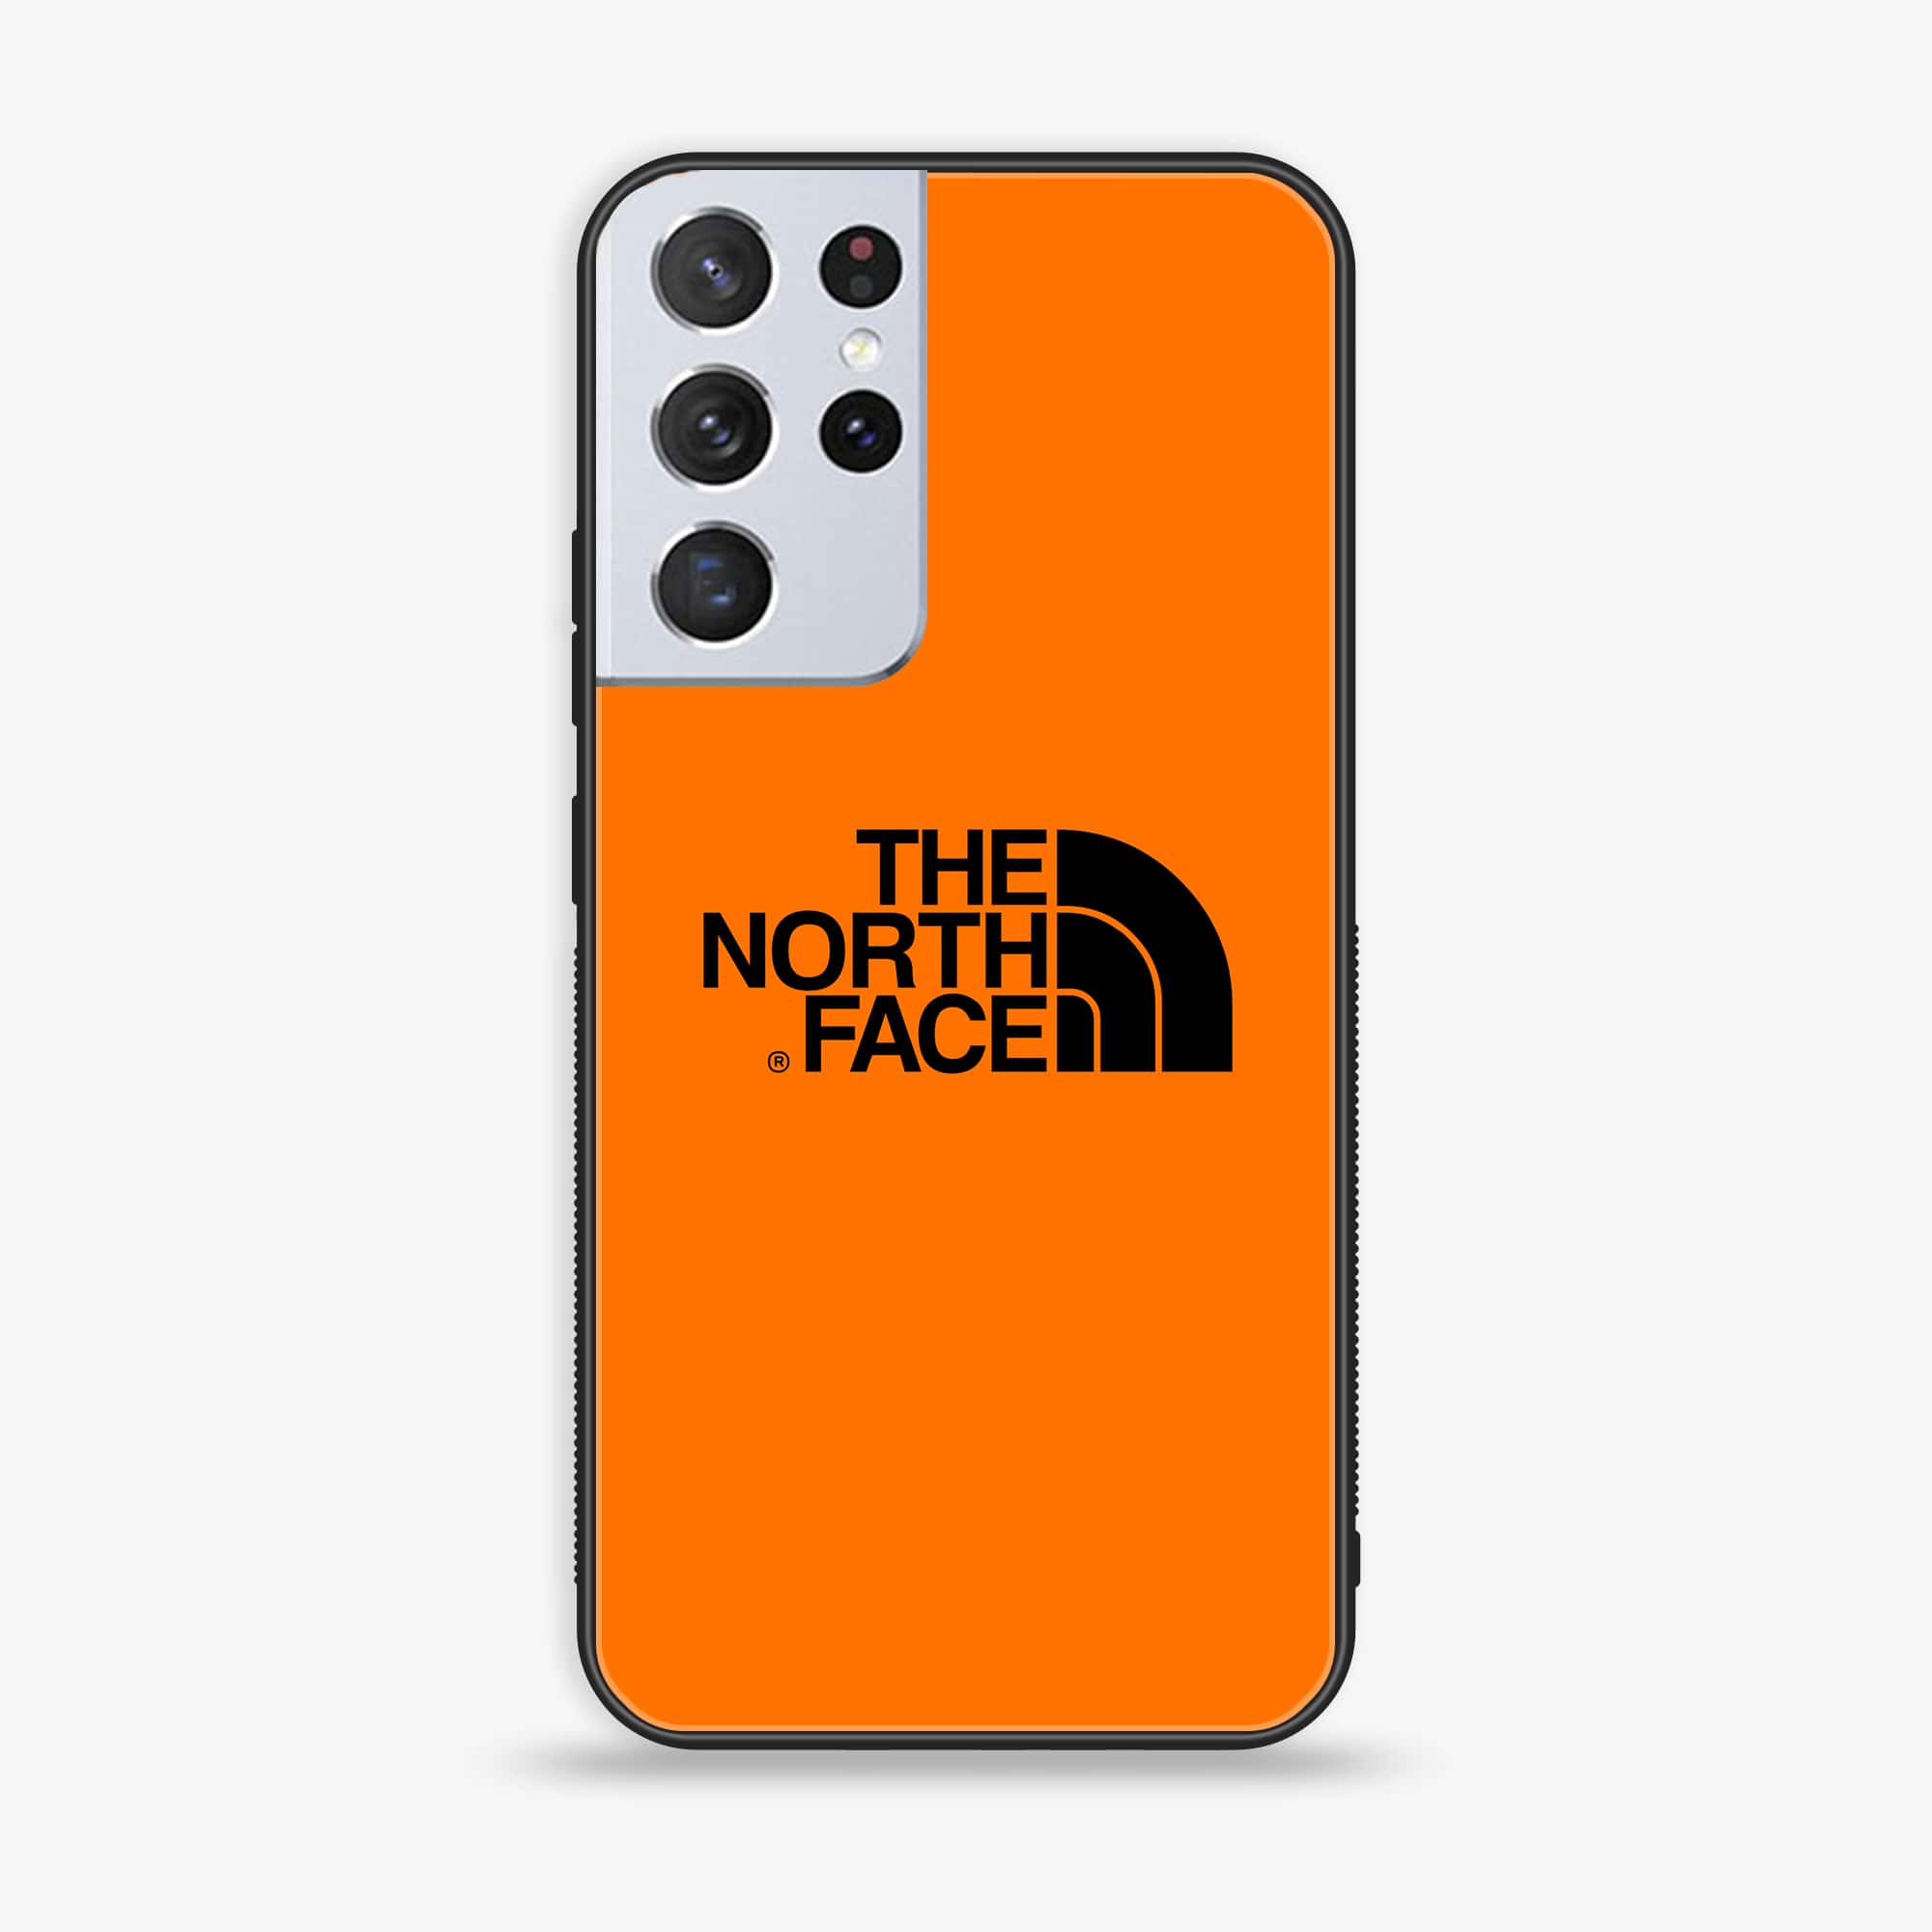 Galaxy S21 Ultra - The North Face Series - Premium Printed Glass soft Bumper shock Proof Case